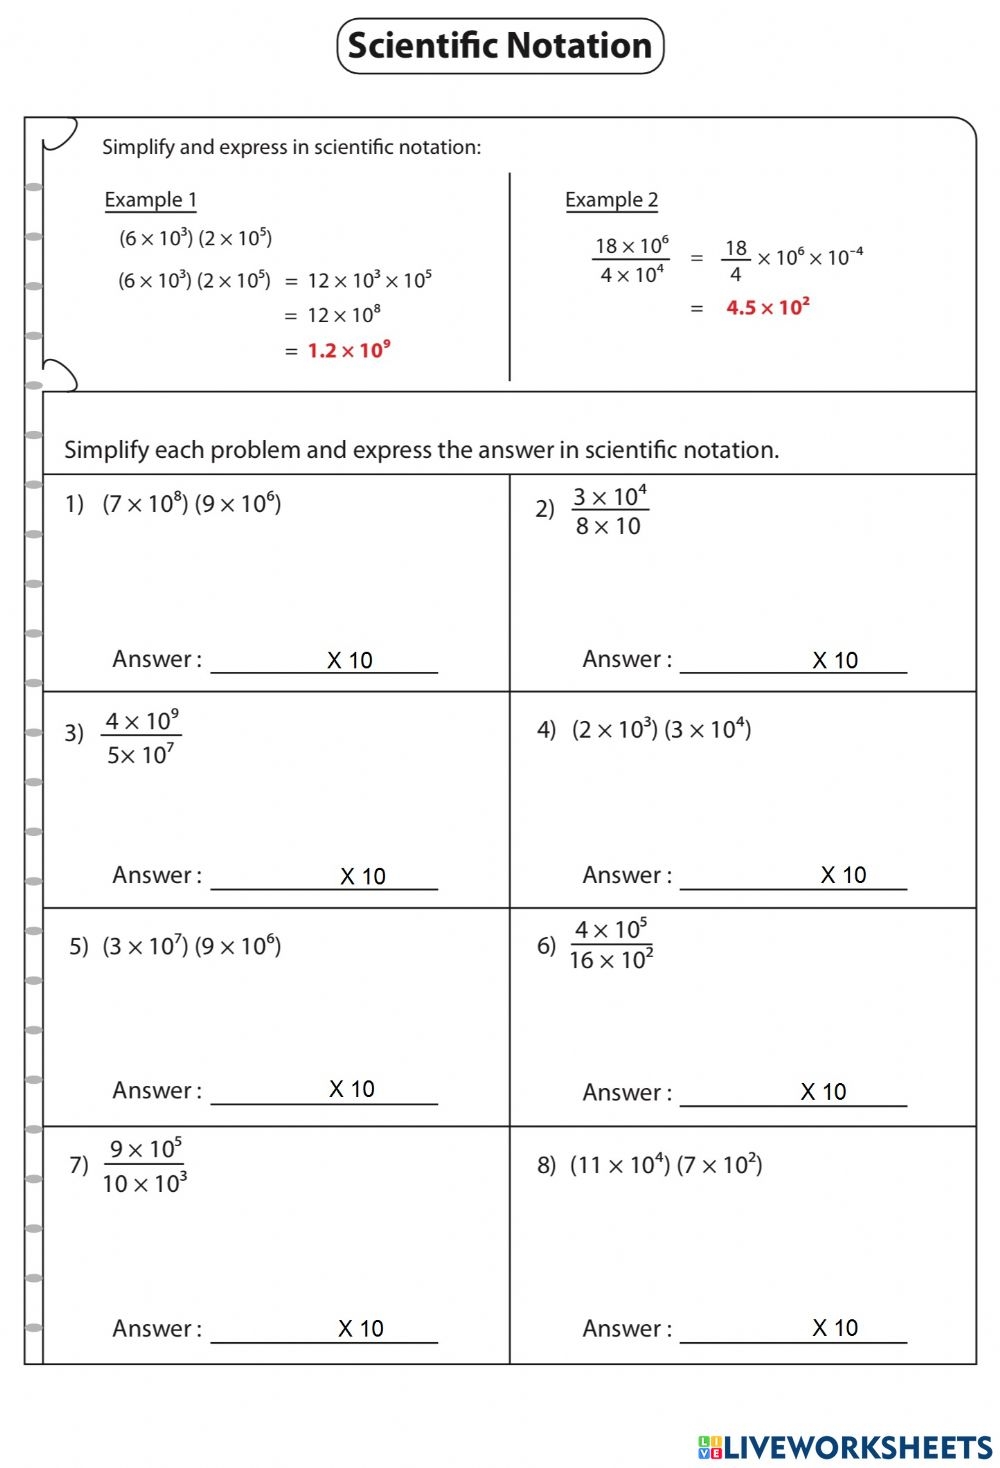 scientific-notation-worksheets-multiplication-and-division-printable-worksheets